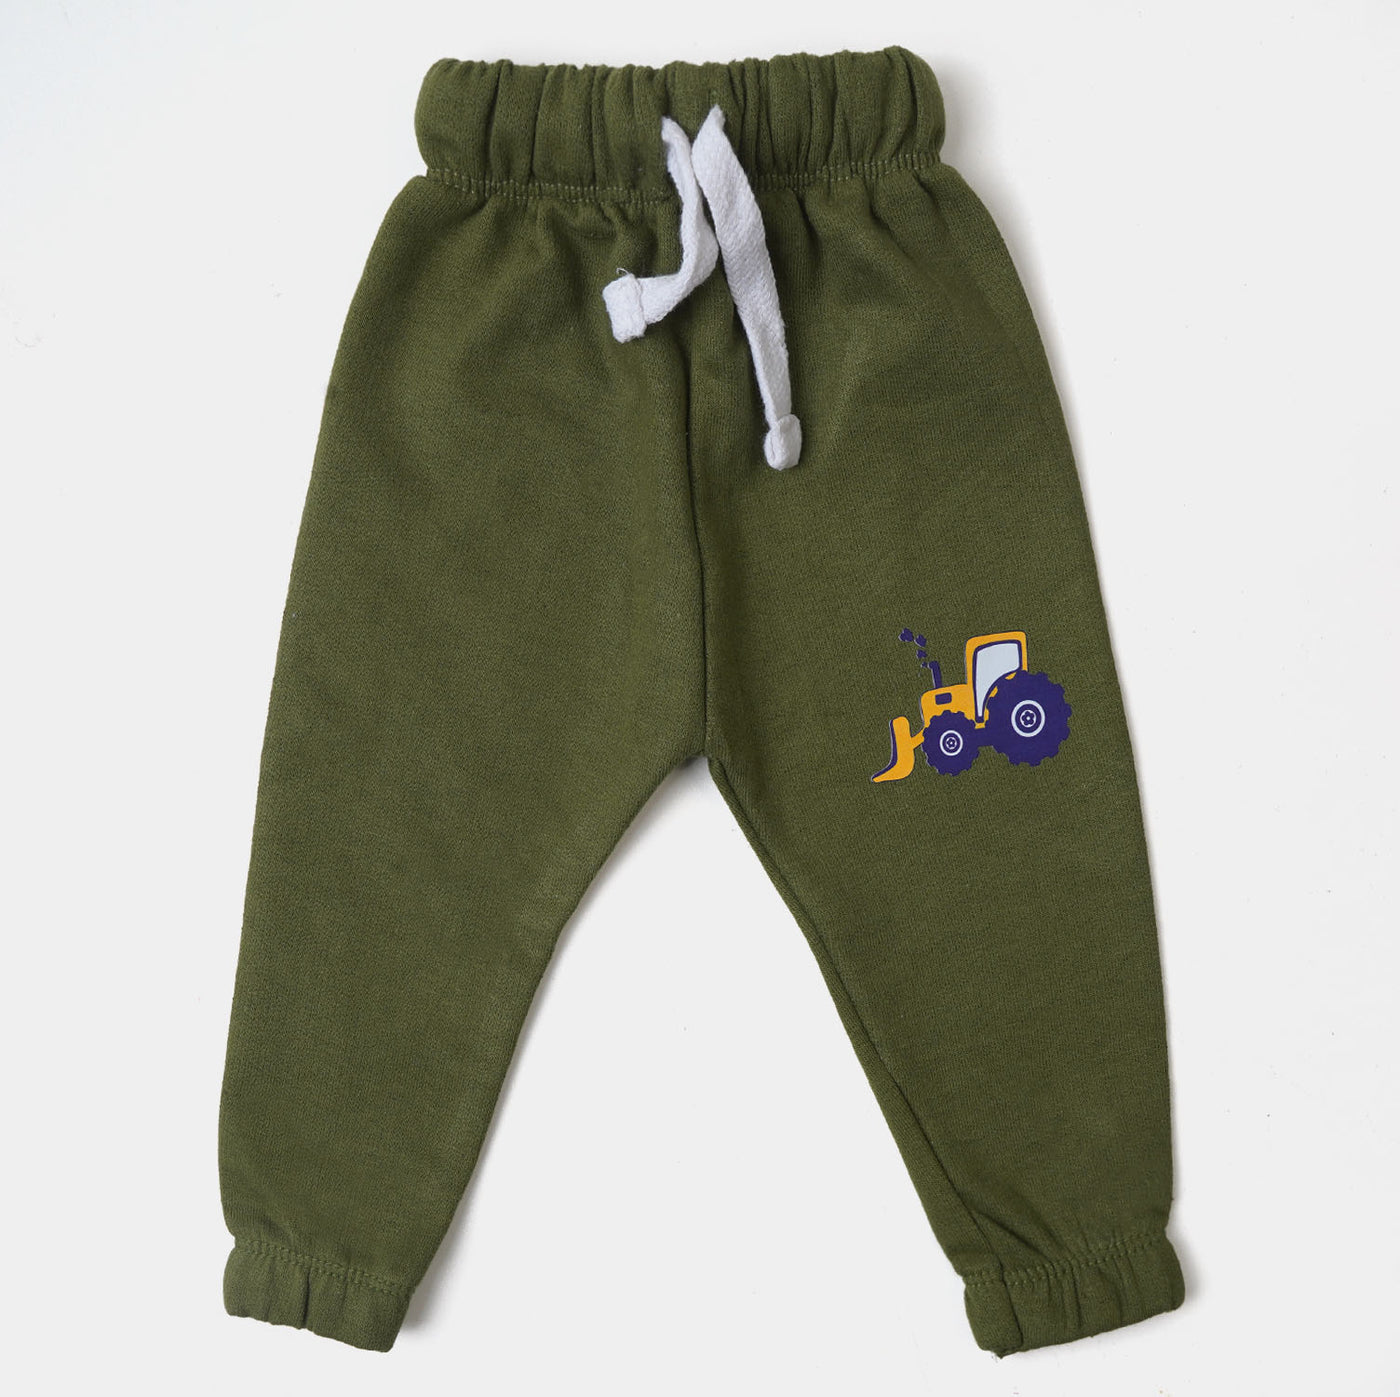 Infant Boys Knitted Suit Tractor - Olive Green/White